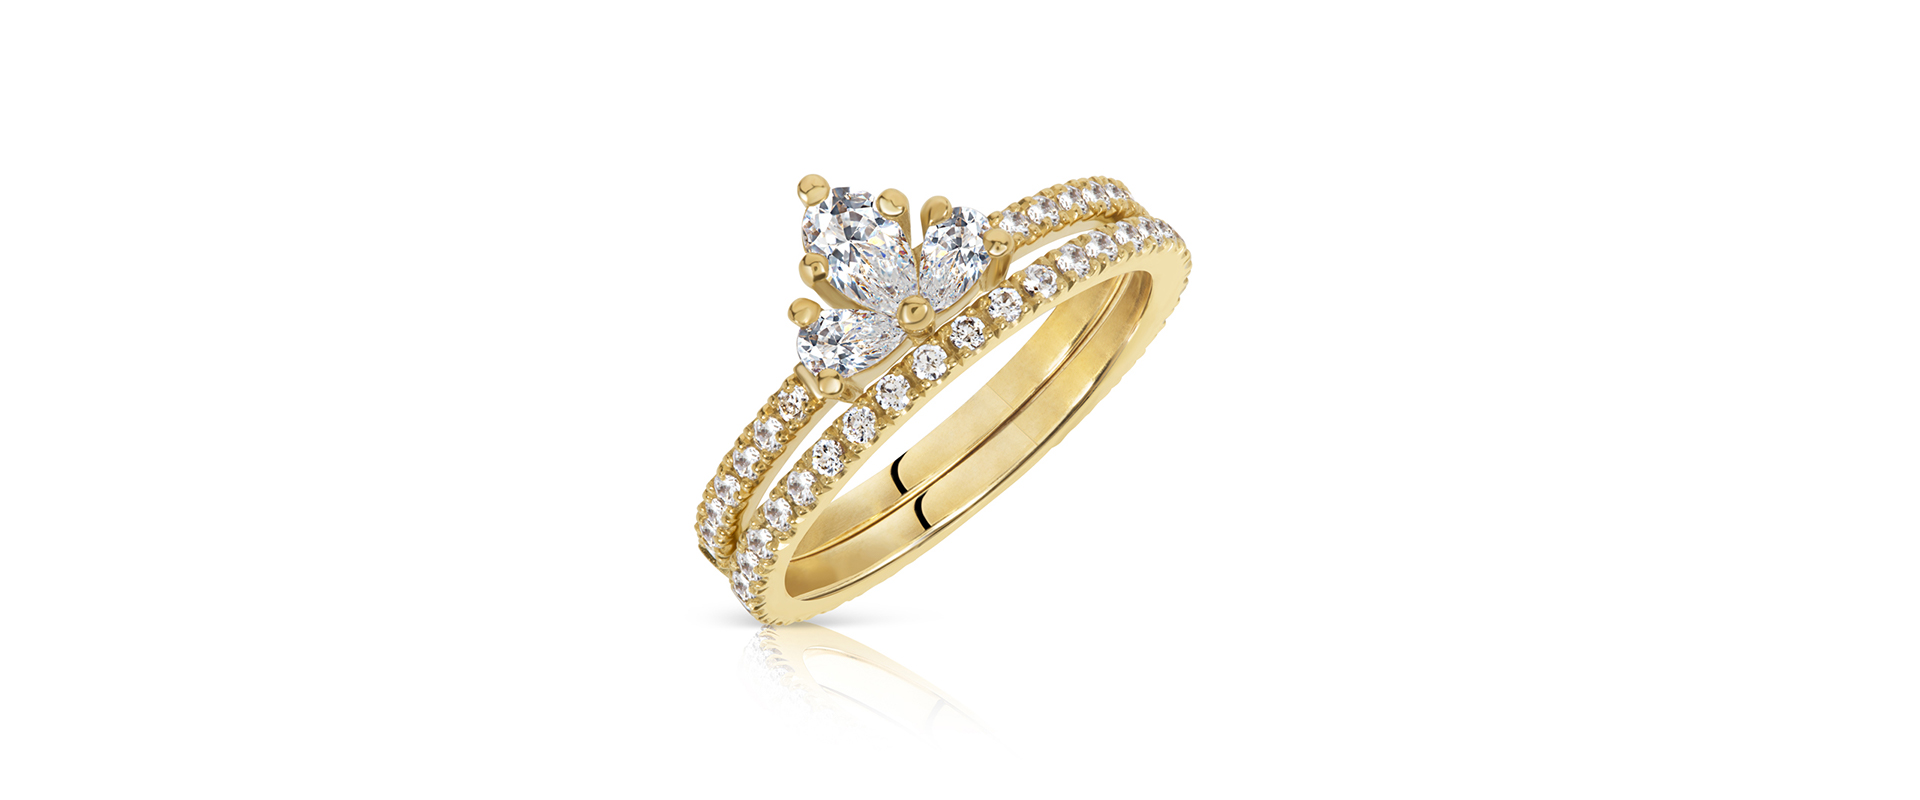 Astral cluster engagement ring 1 pear trio with diamond wedding band in yellow gold